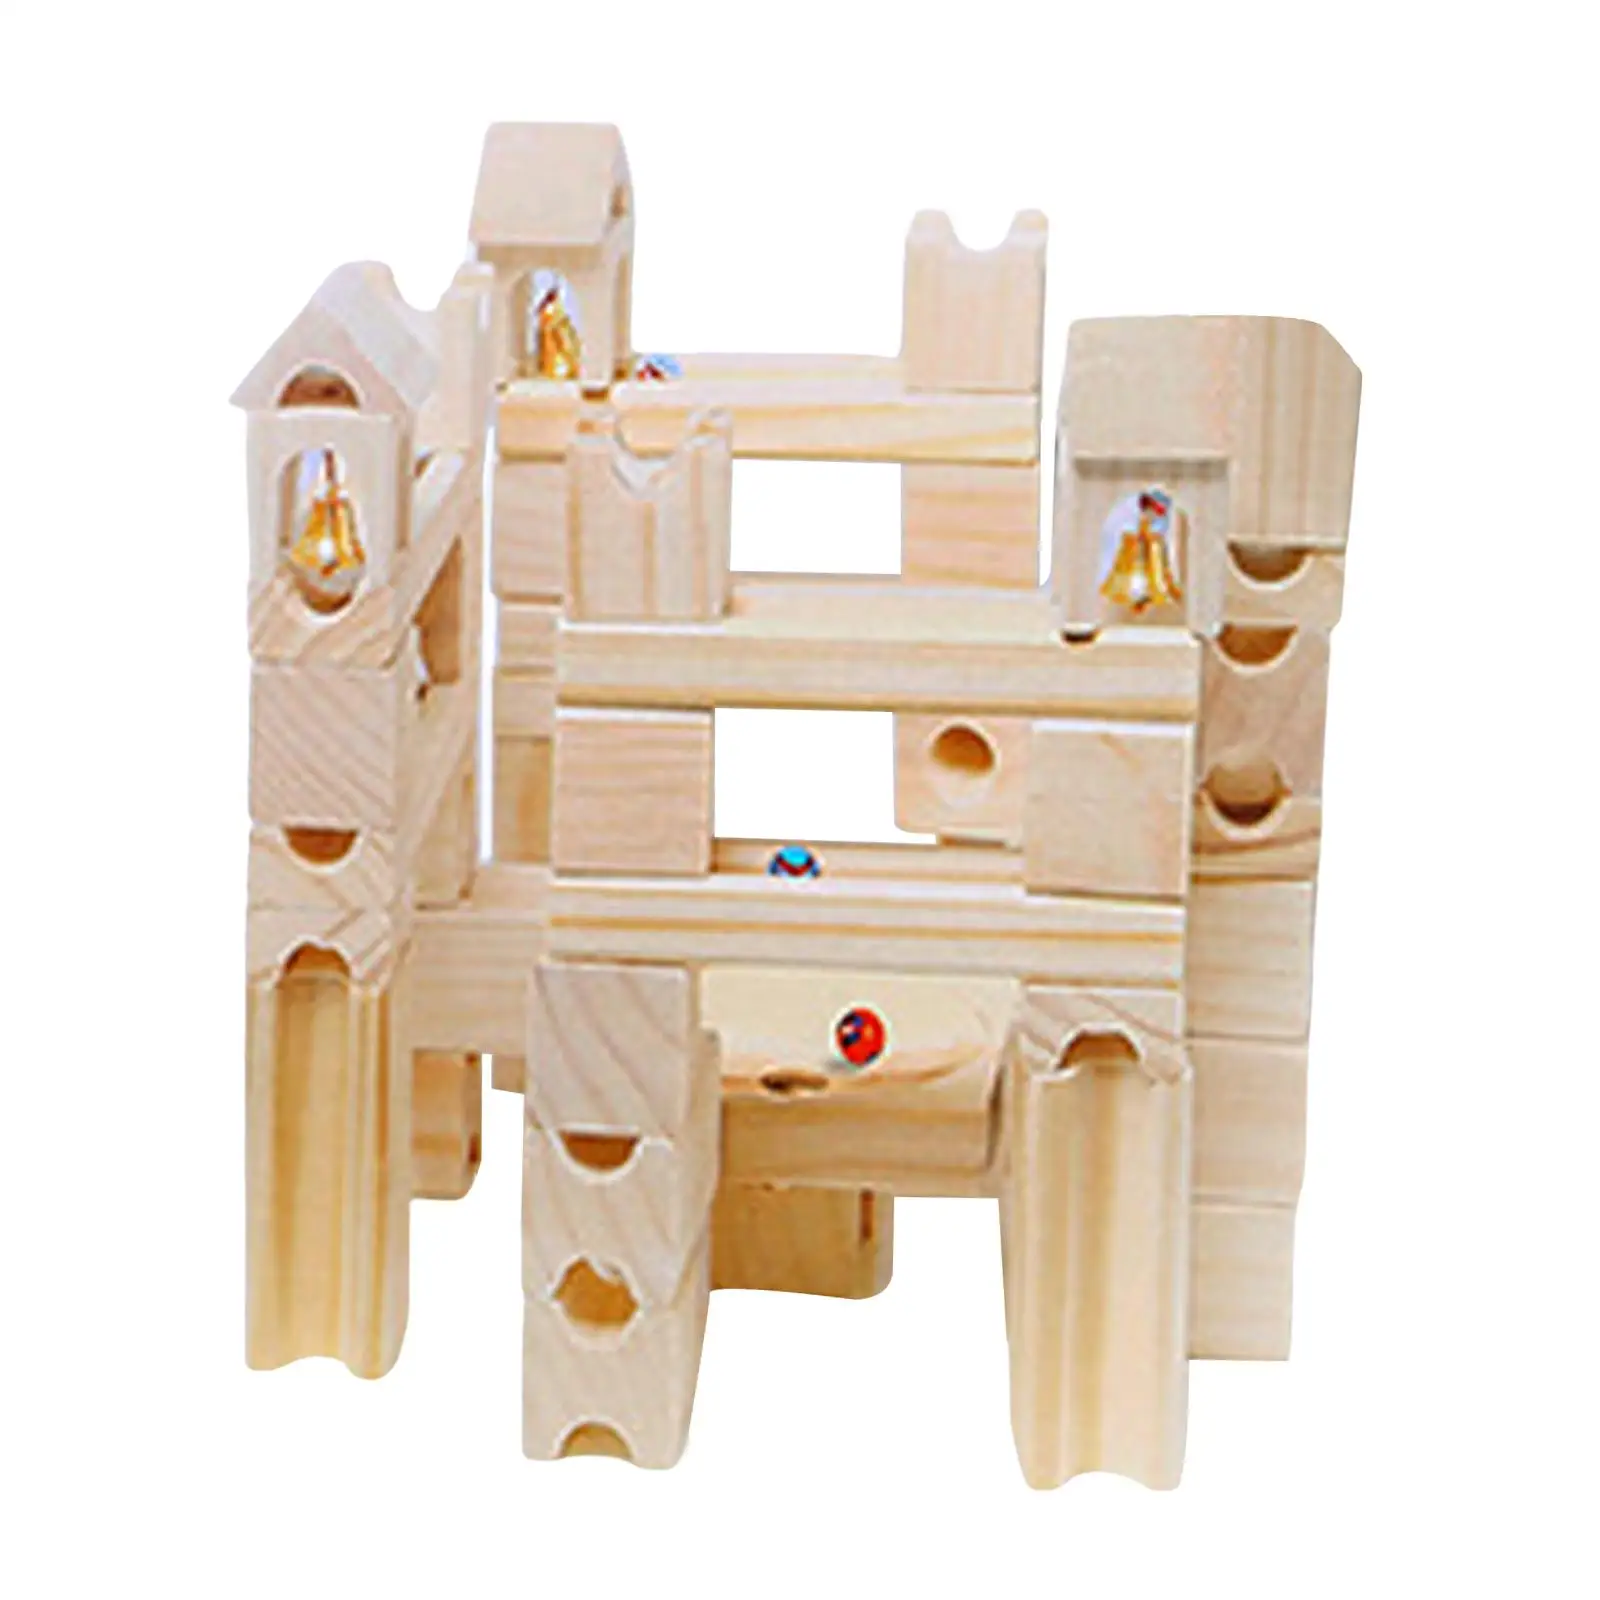 Wooden Marble Run Building Blocks Set, Marble Track Maze Game, Marble Ramps